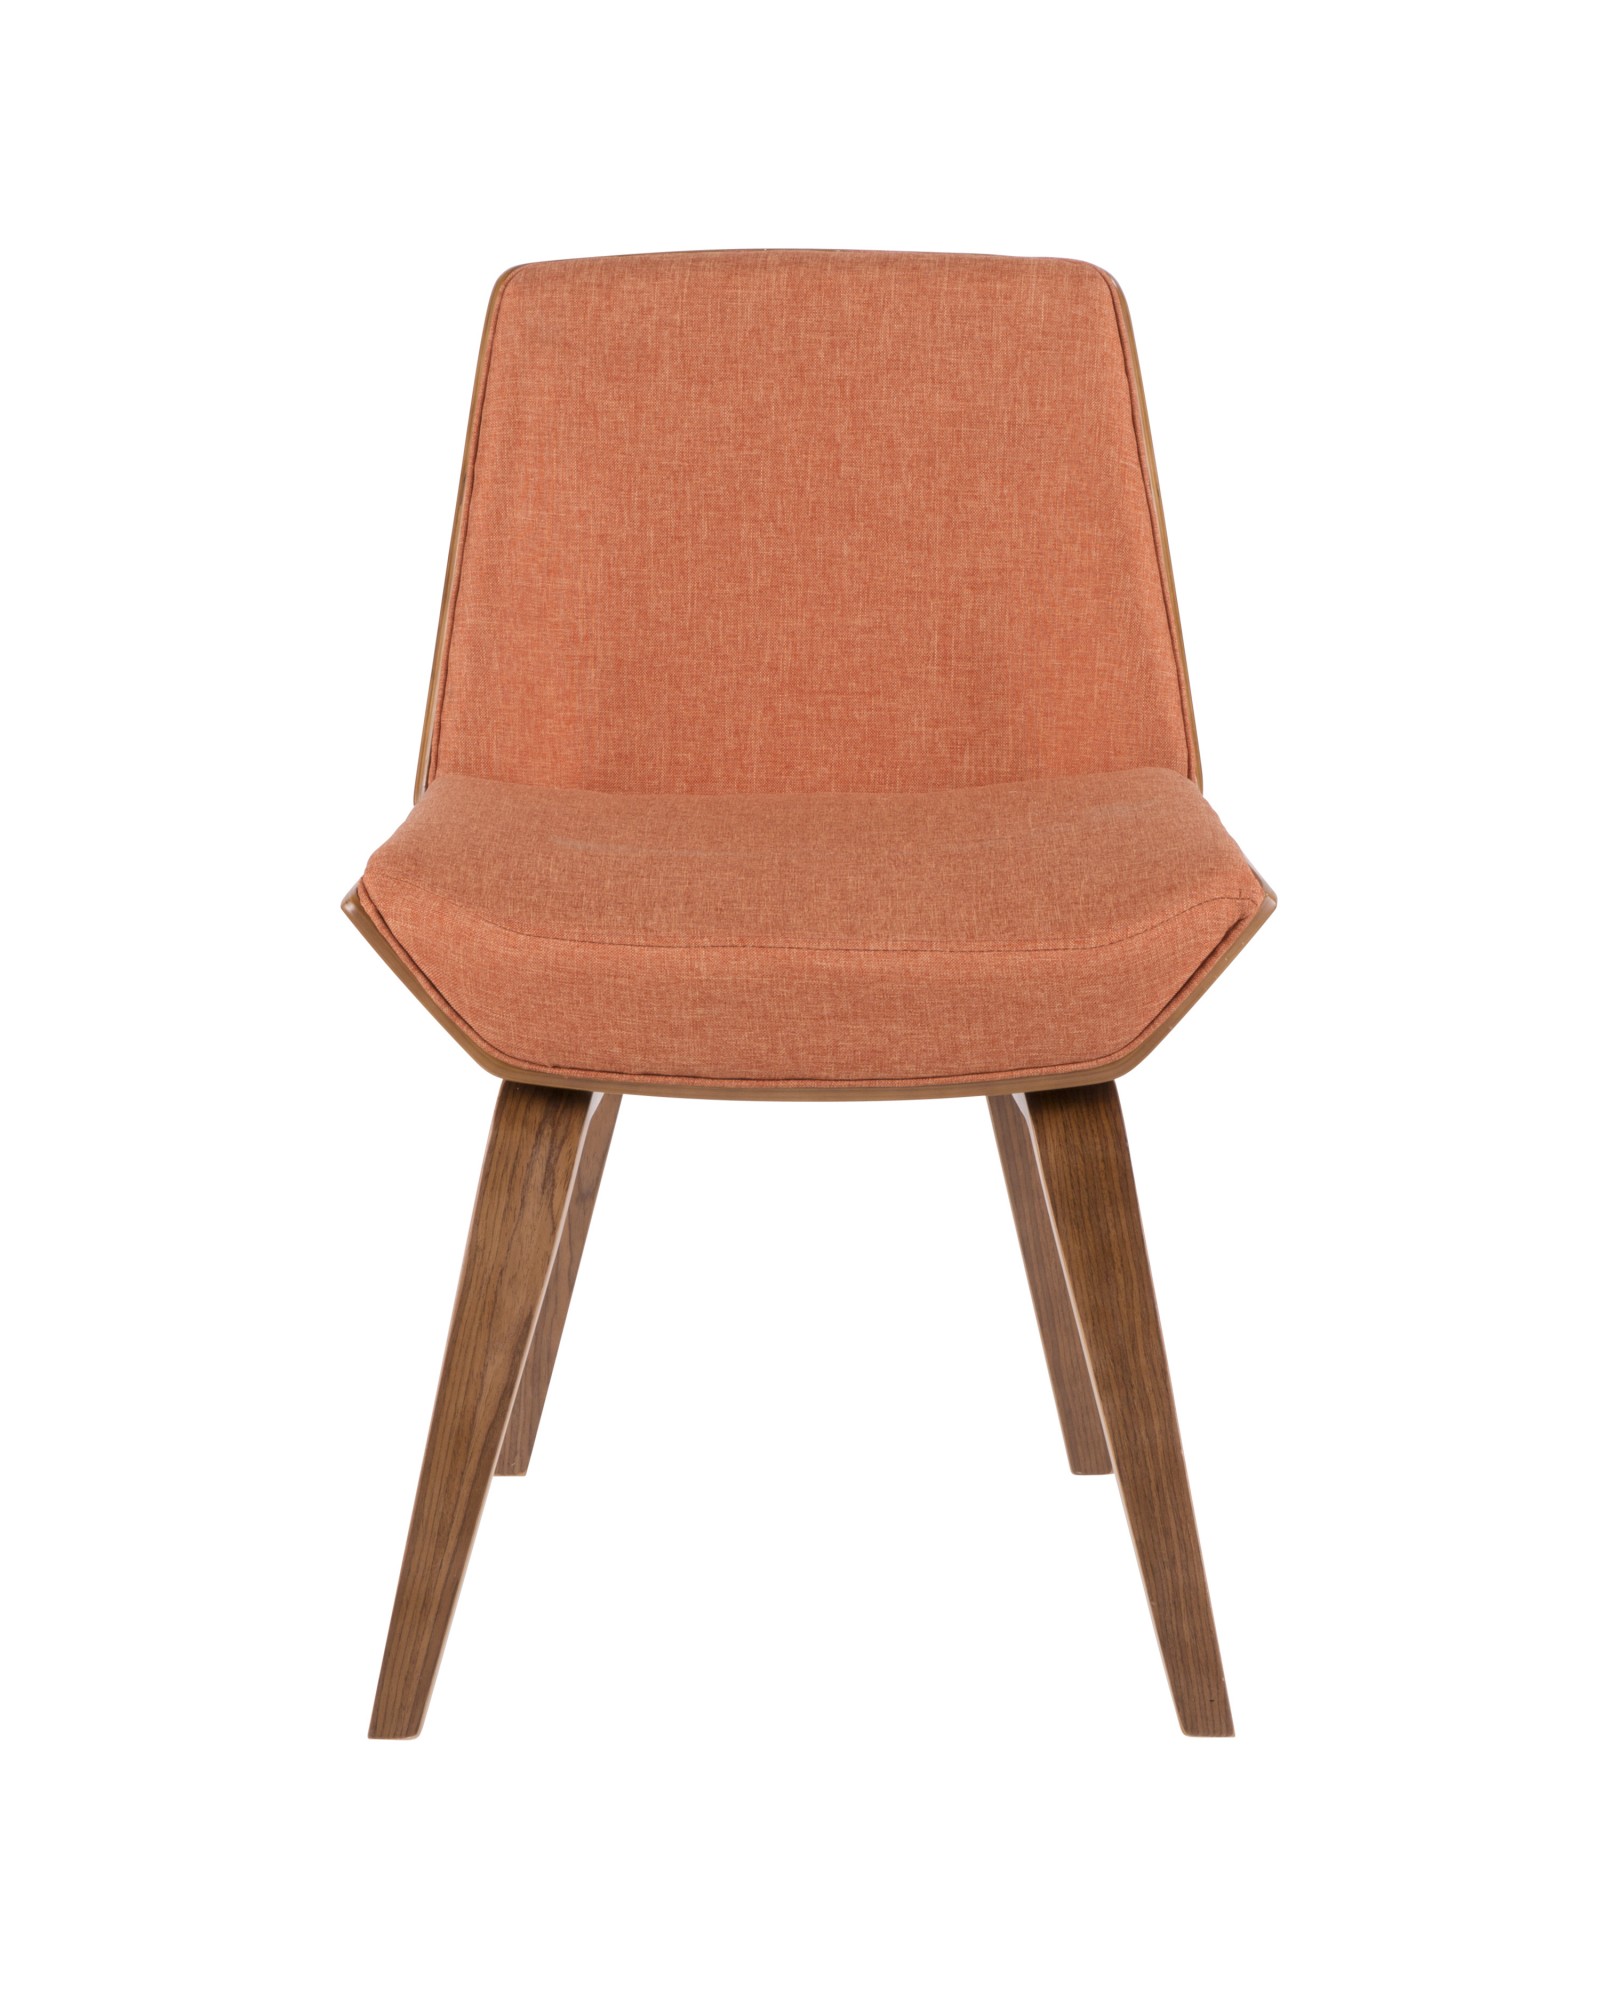 Corazza Mid-century Modern Dining/Accent Chair in Walnut and Orange